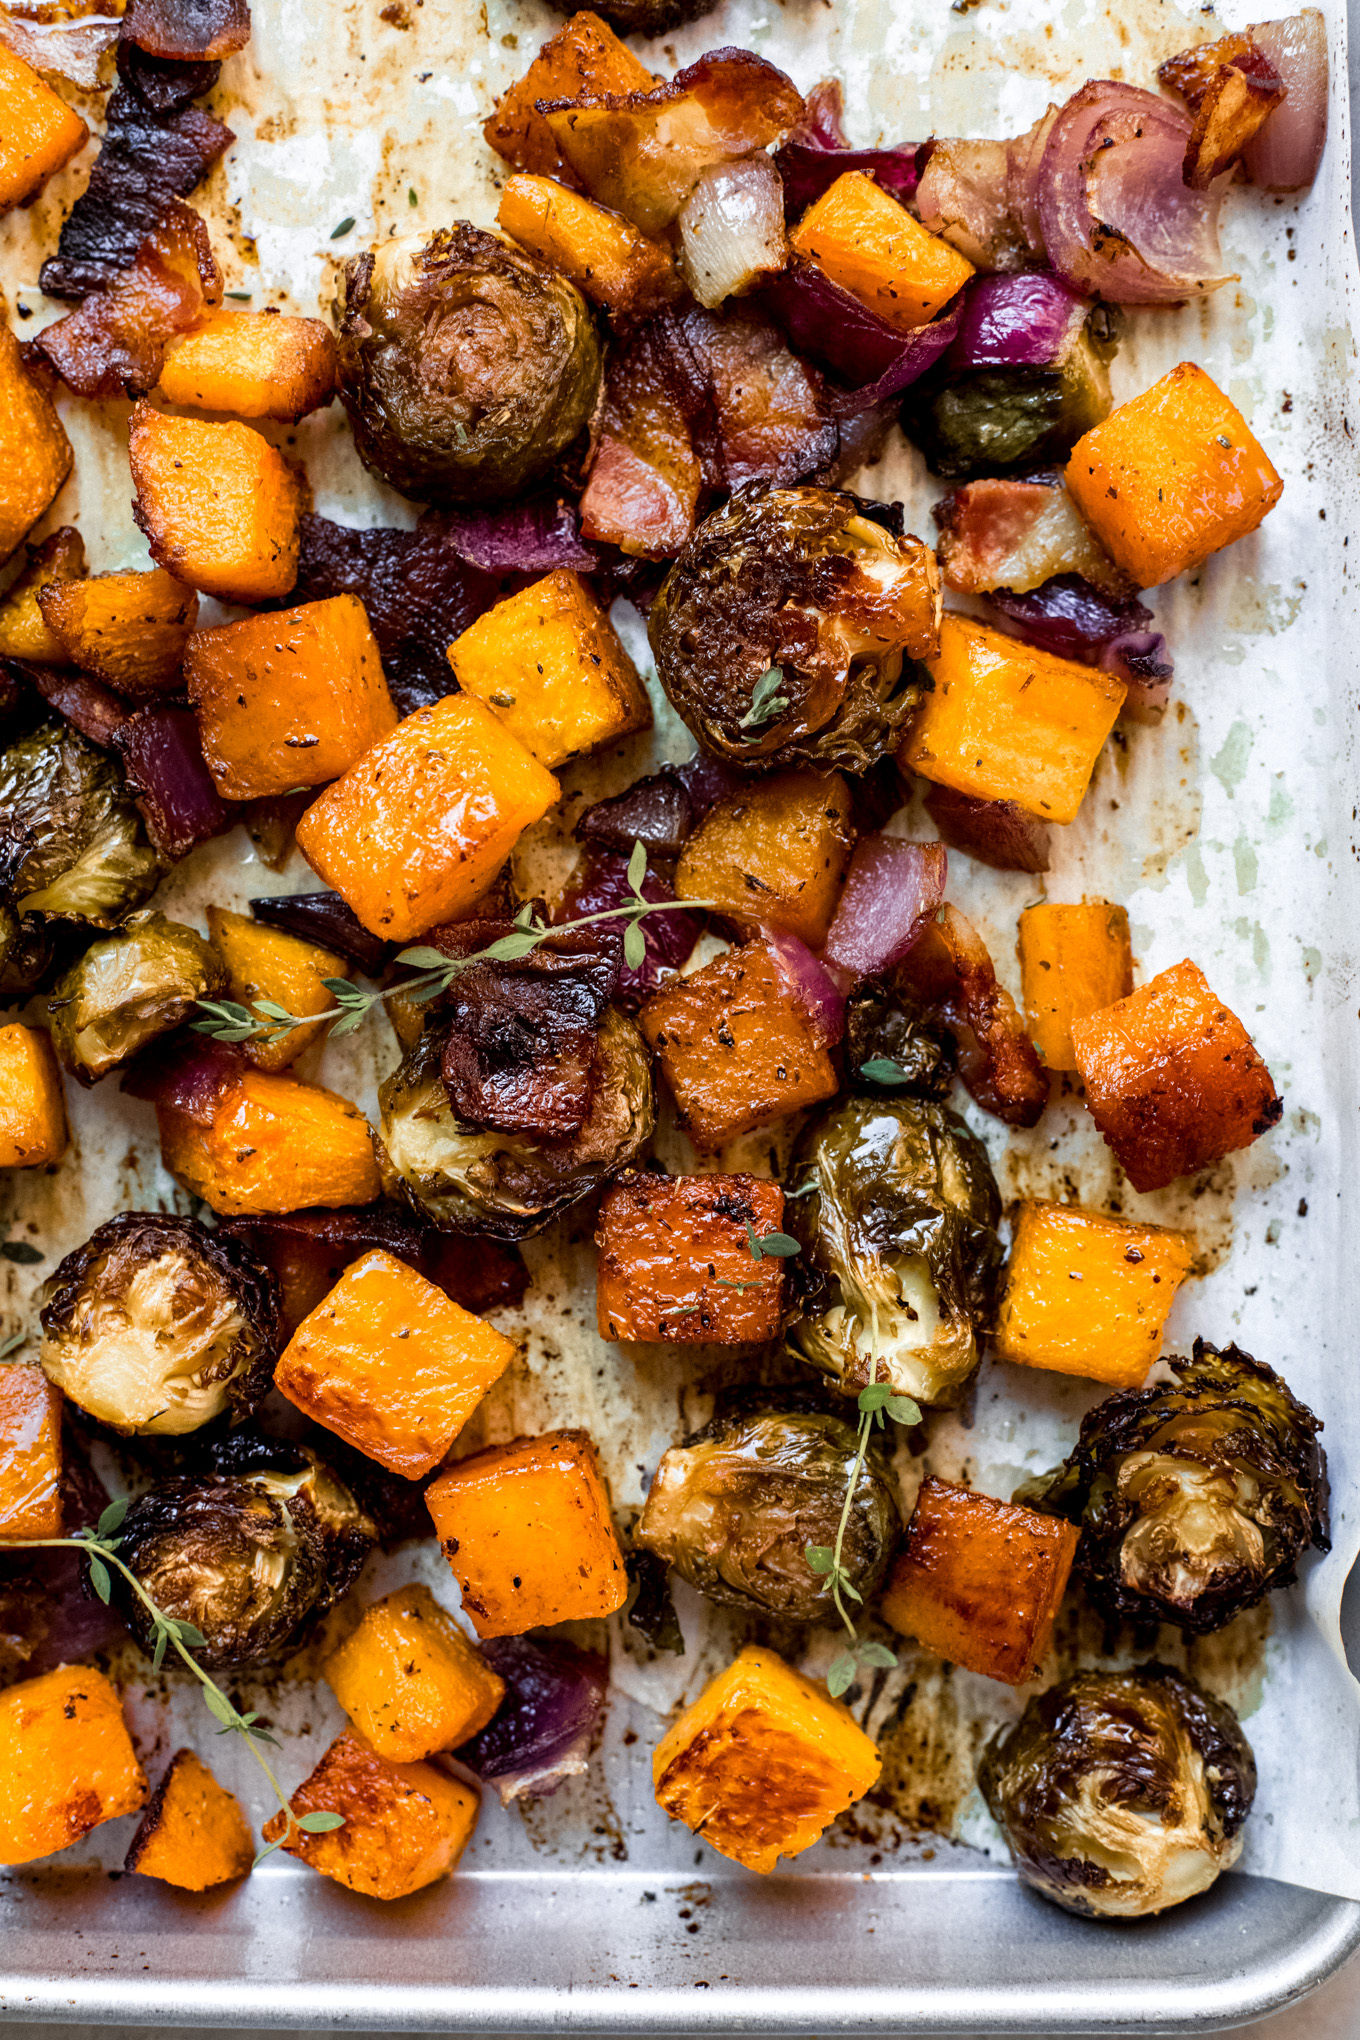 roasted brussels sprouts, butternut squash, on red onion on a sheet pan.